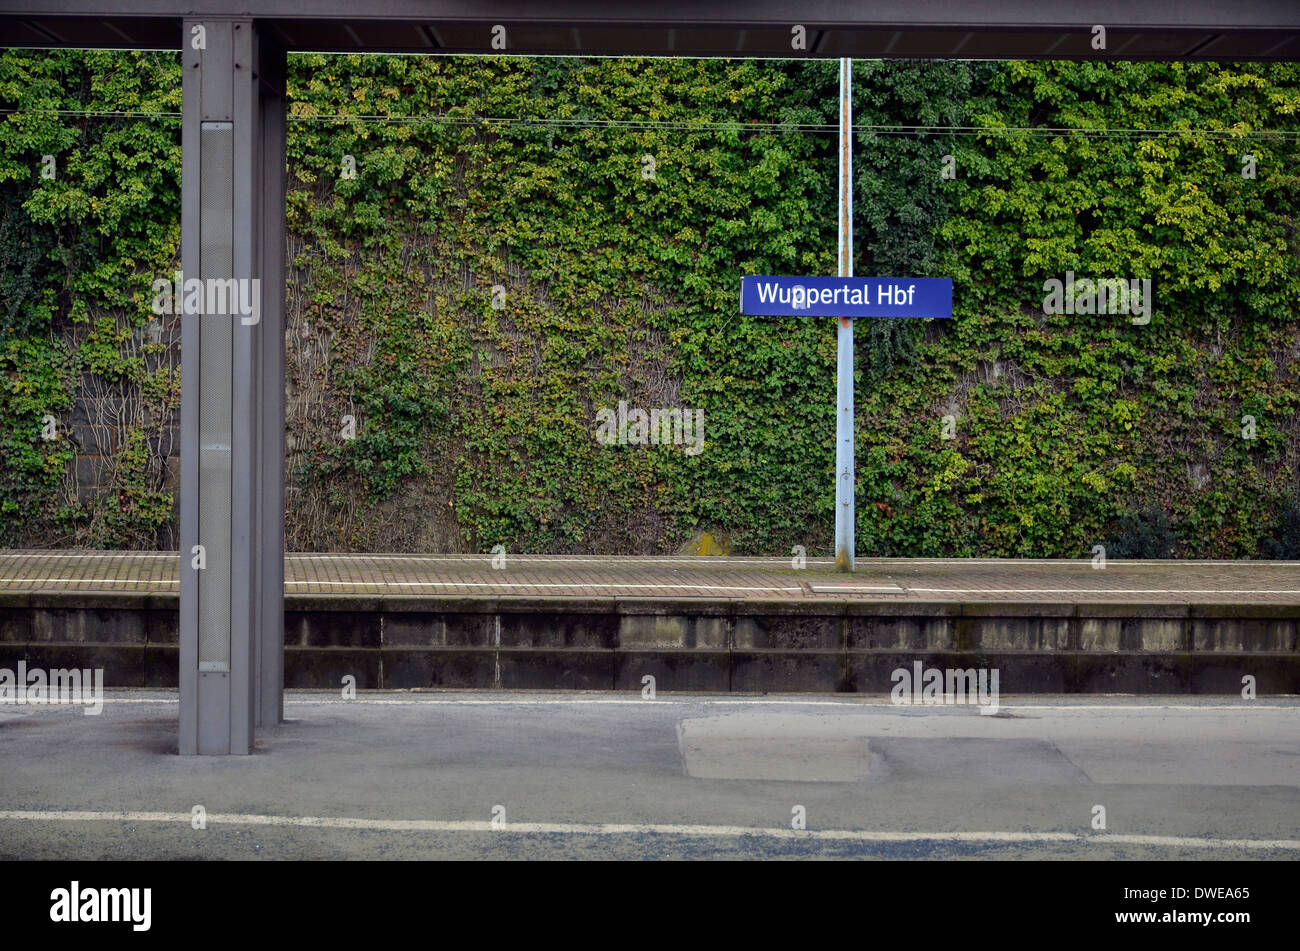 Wuppertal Hauptbahnhof (main railway station) with station sign. Stock Photo